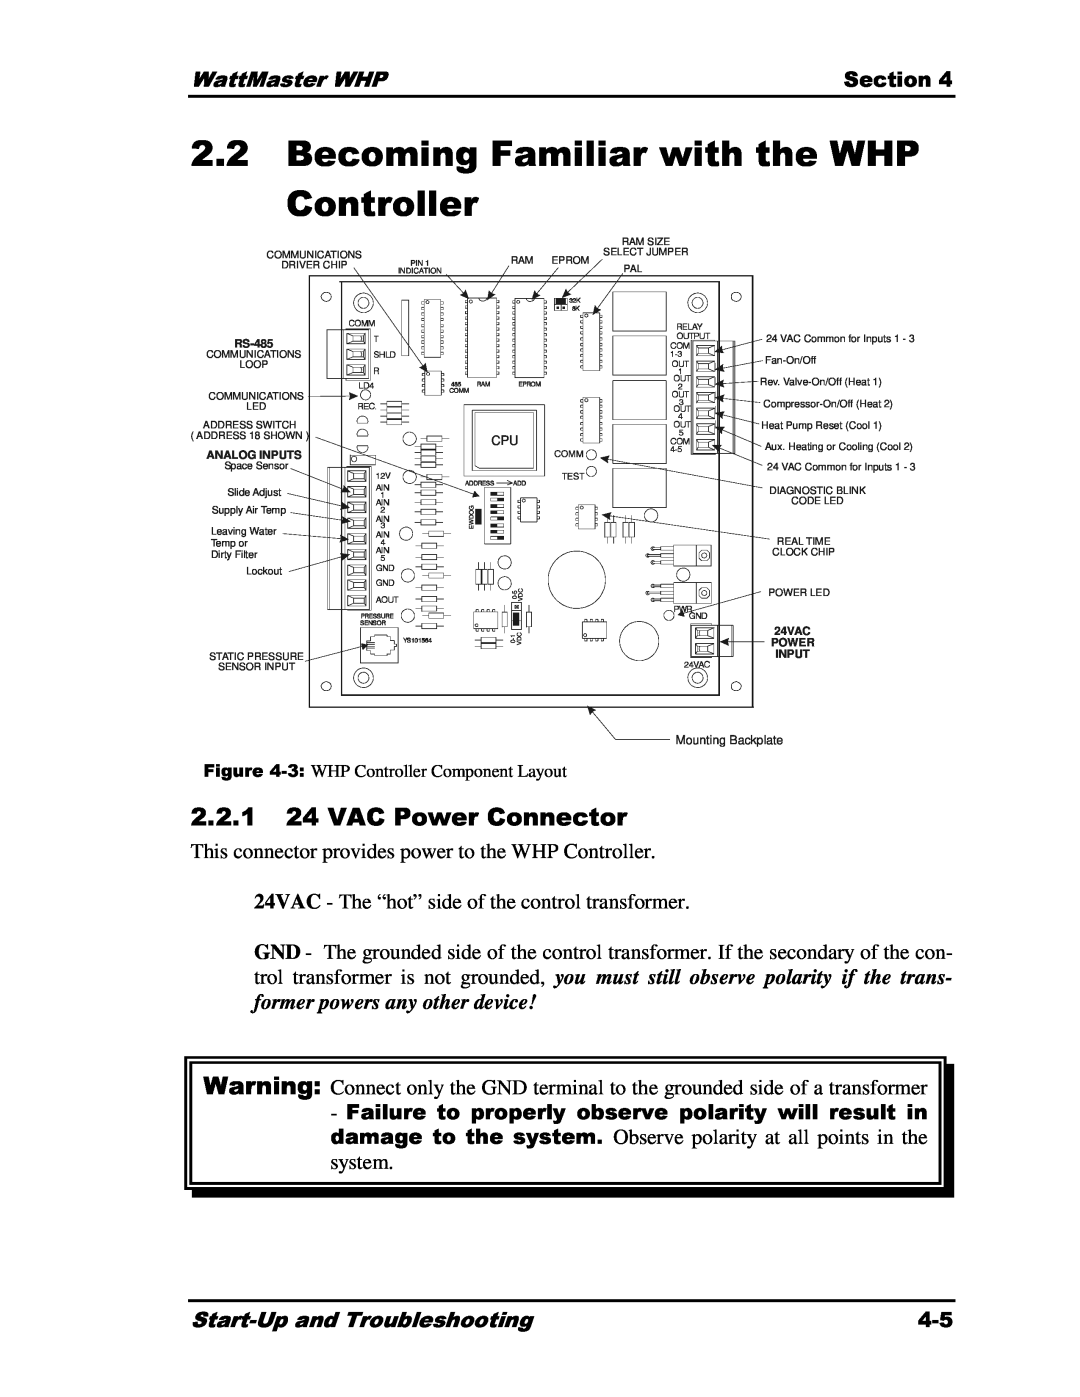 Heat Controller Water Source Heat Pump 2.2Becoming Familiar with the WHP Controller, 2.2.1, WattMaster WHP, Section, 4VAC 